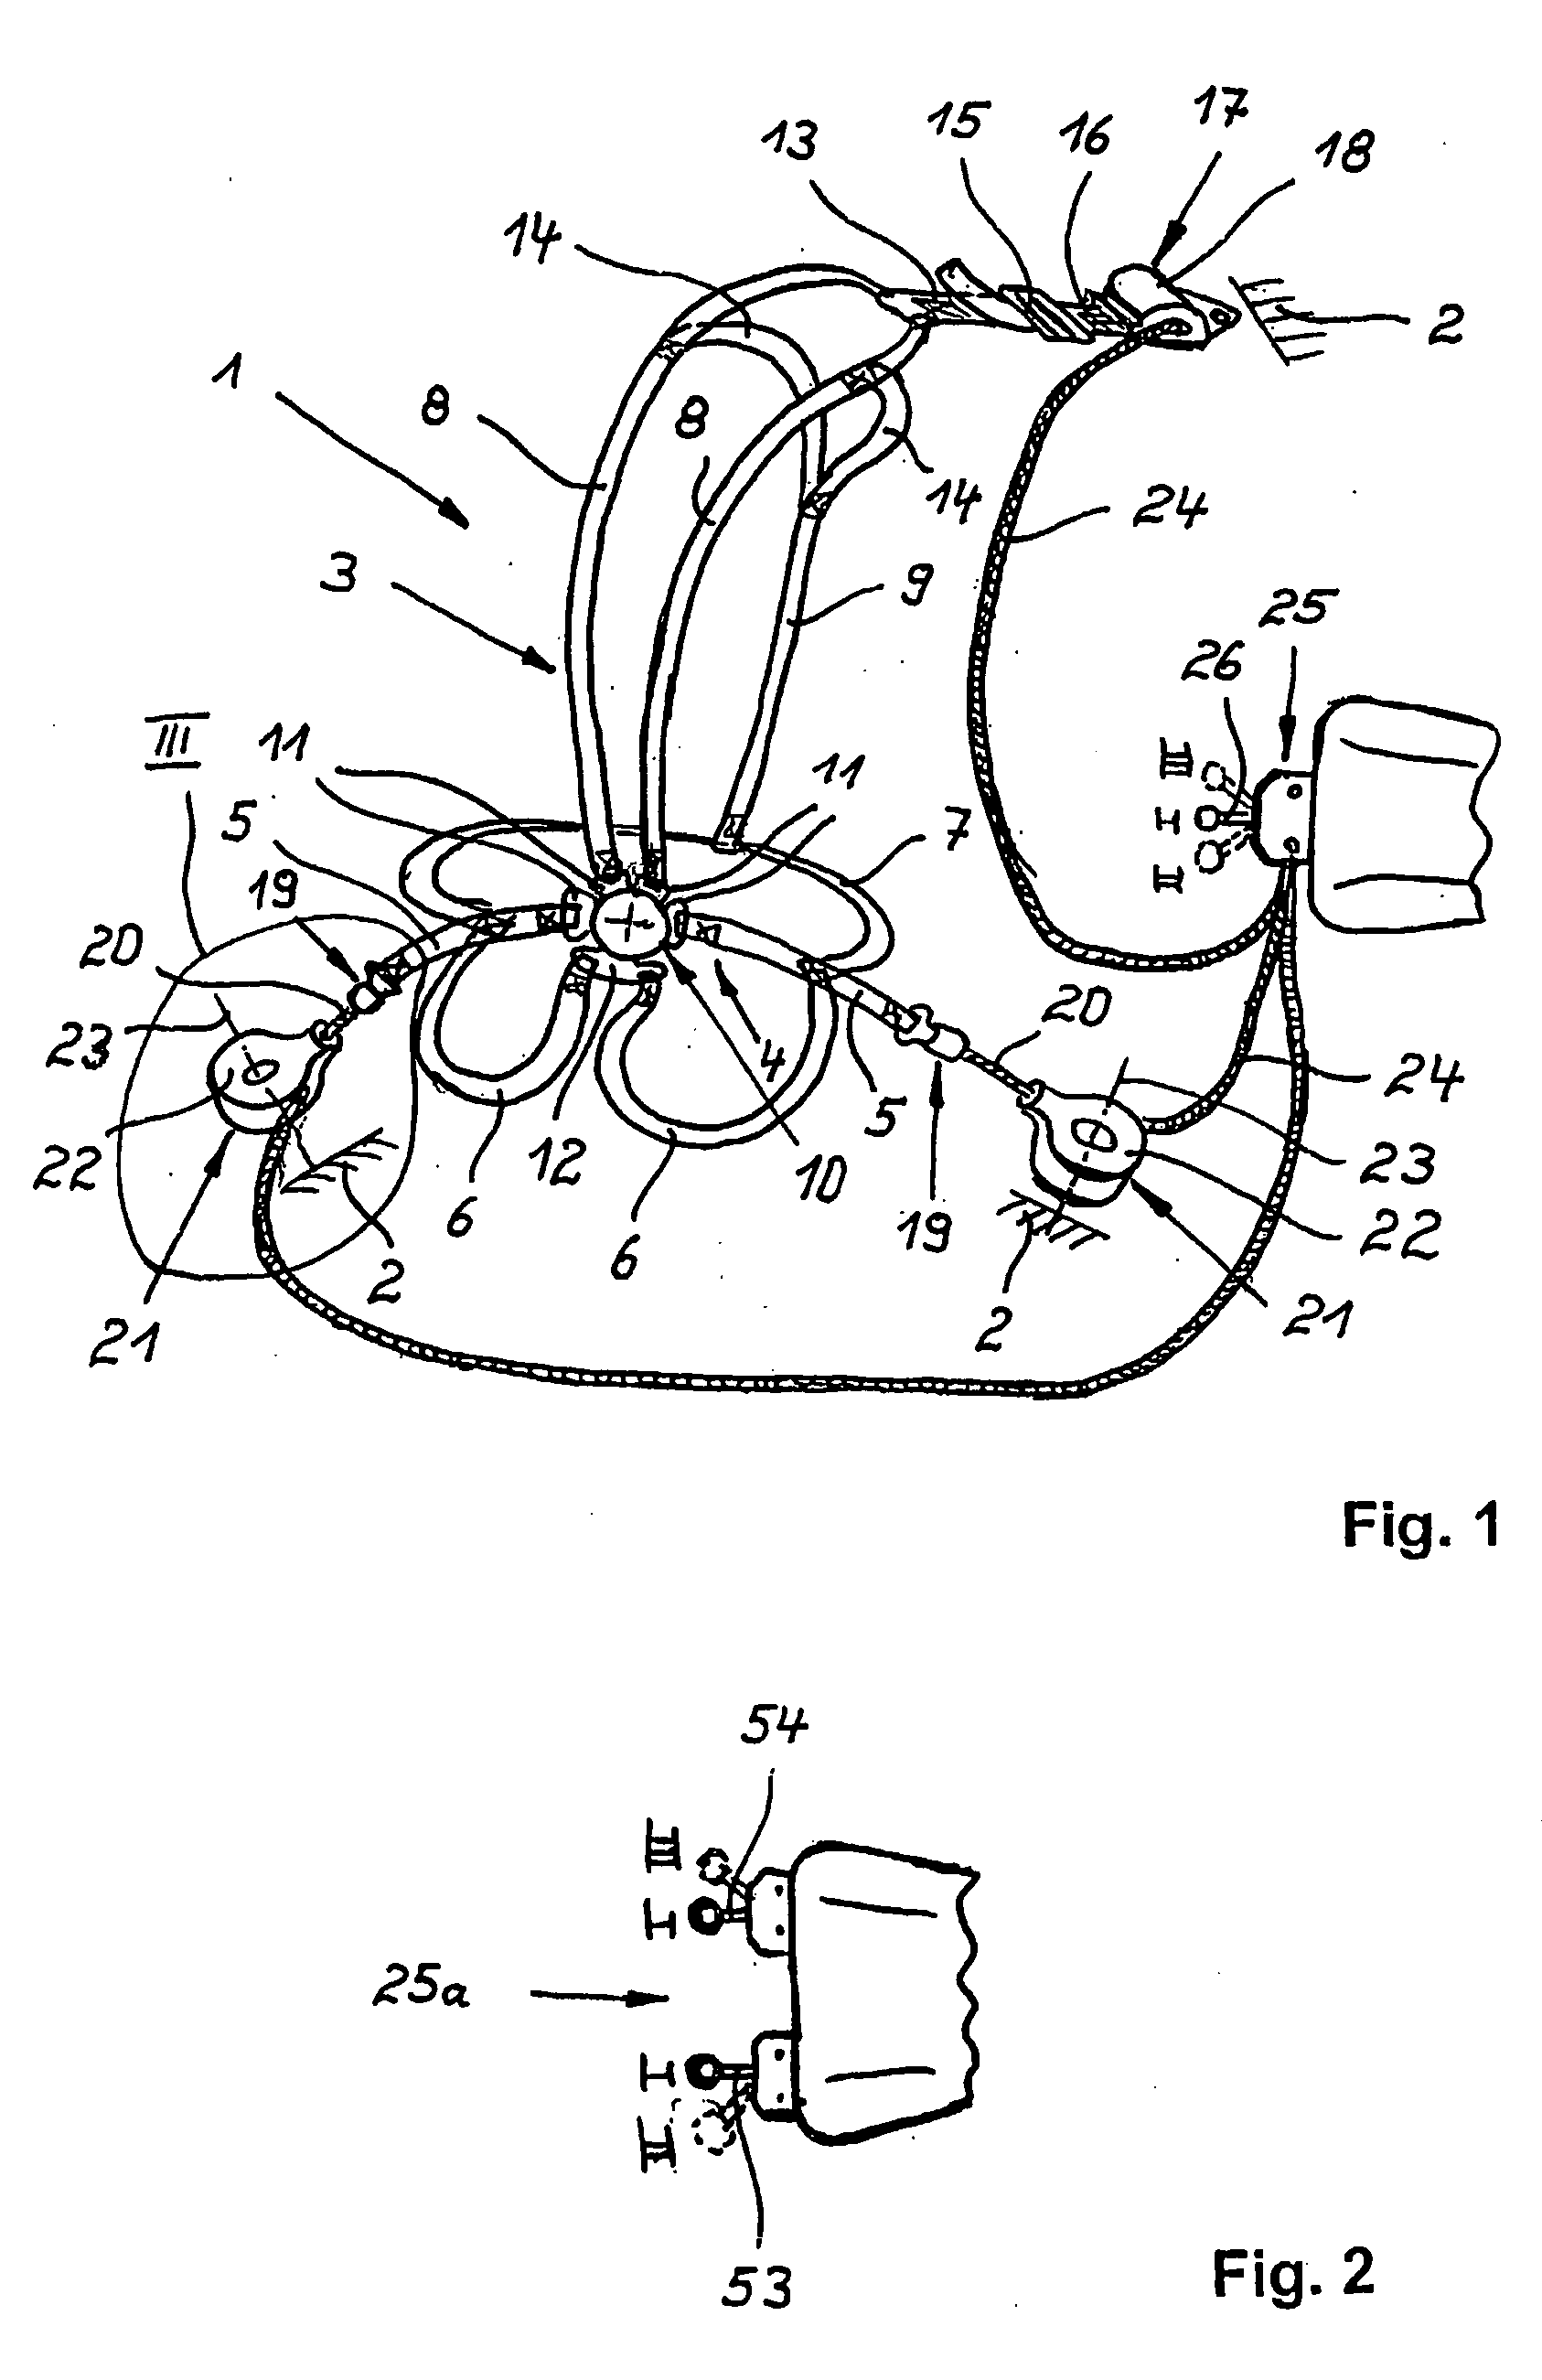 Position securing system for restraining an occupant in land and aeronautical vehicles